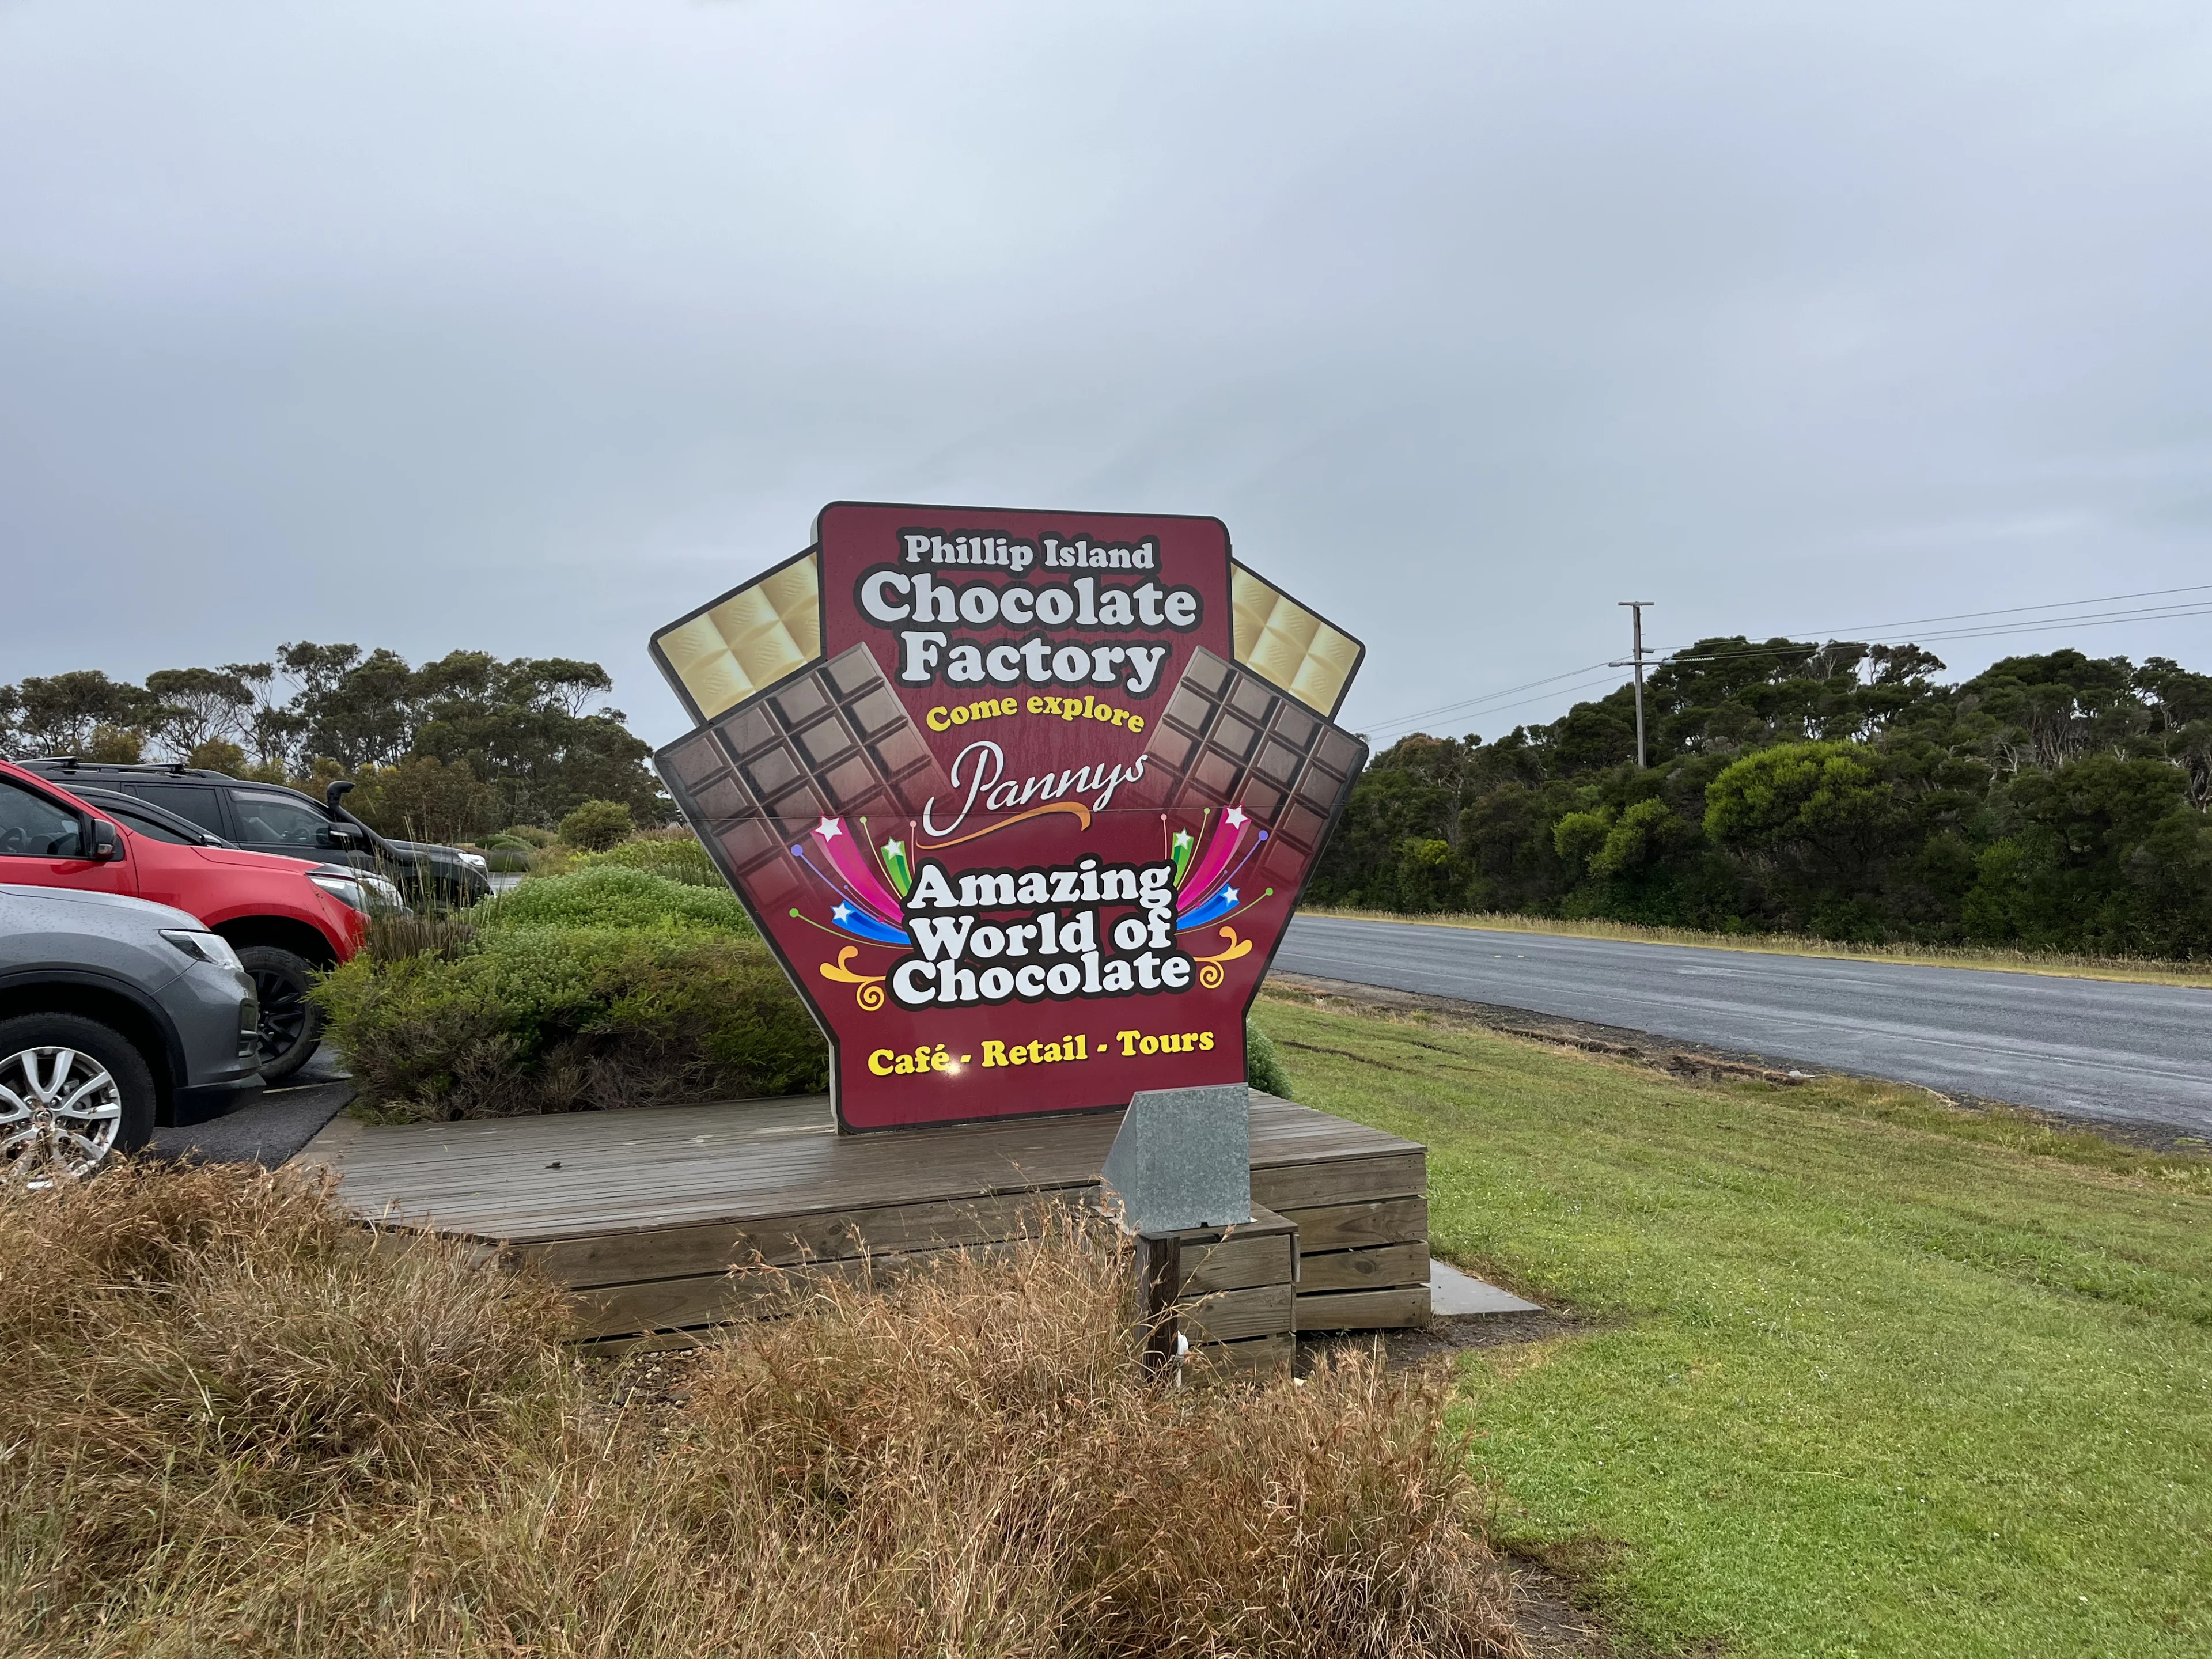 Panny's Amazing World of Chocolate – Chocolate Factory in Phillip Island, Victoria.